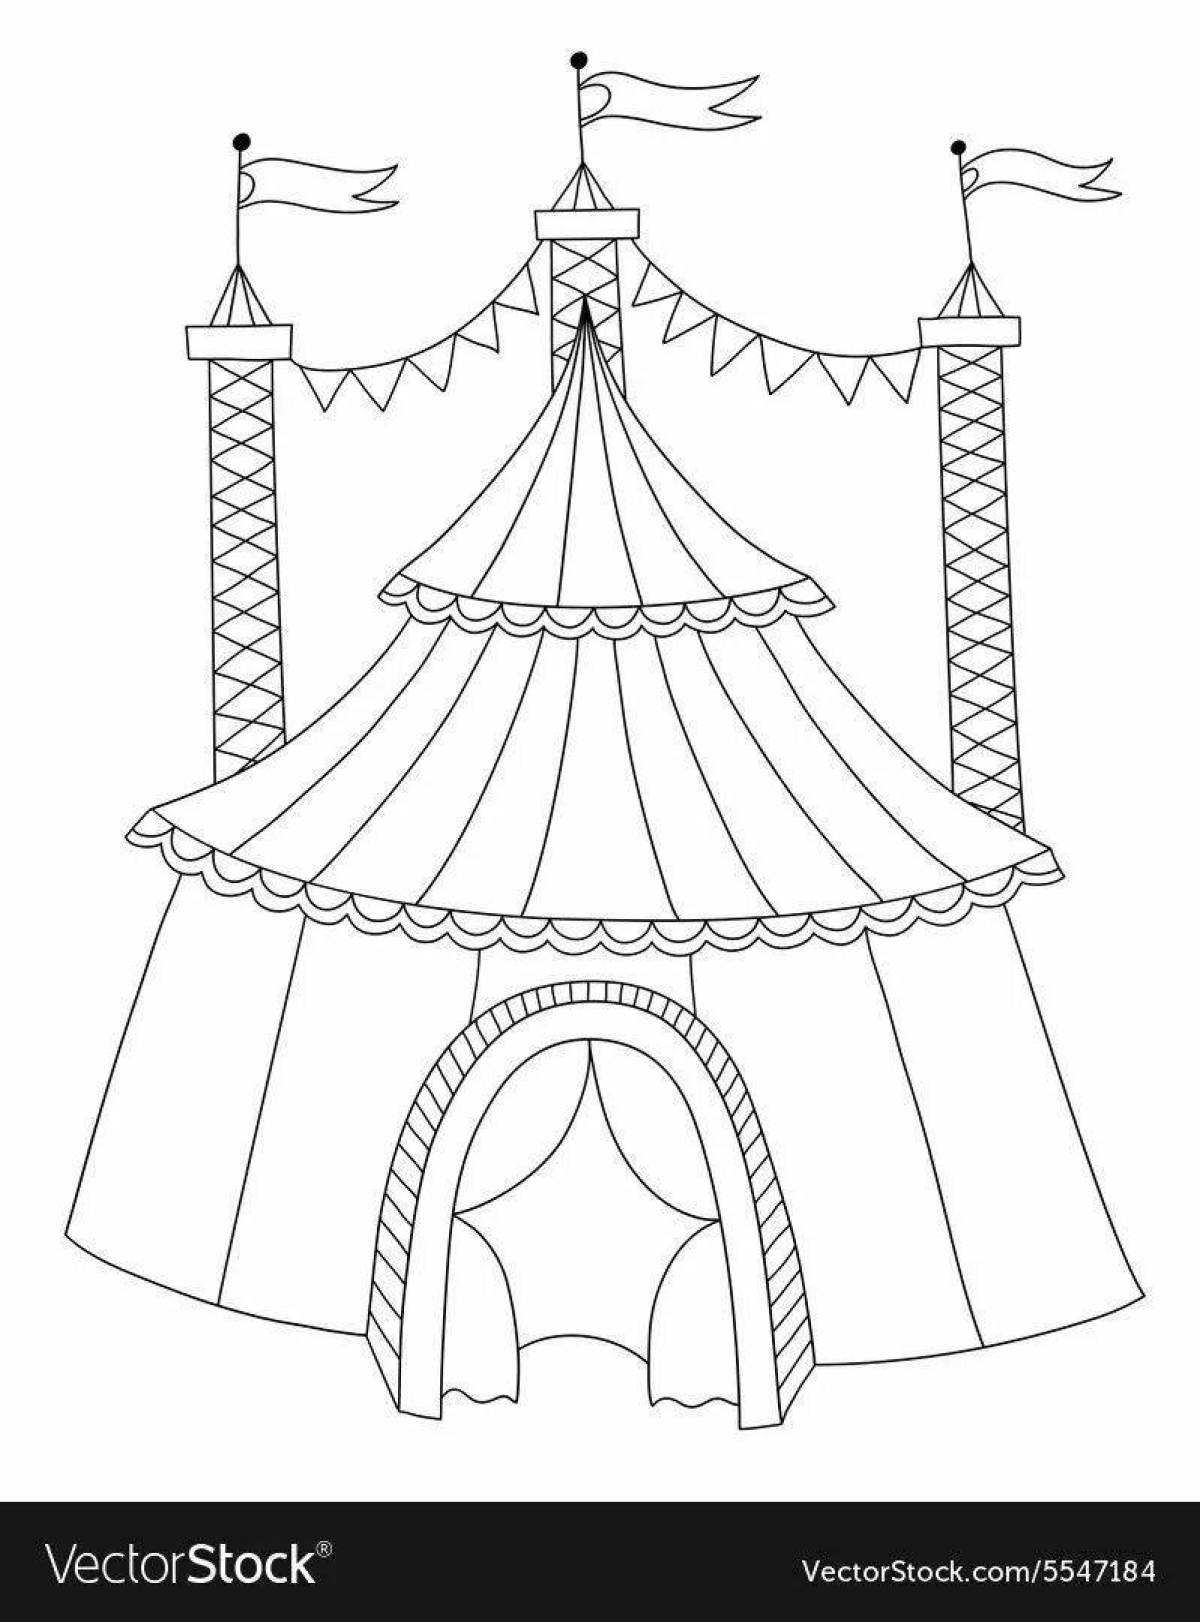 Colourful circus tent coloring page